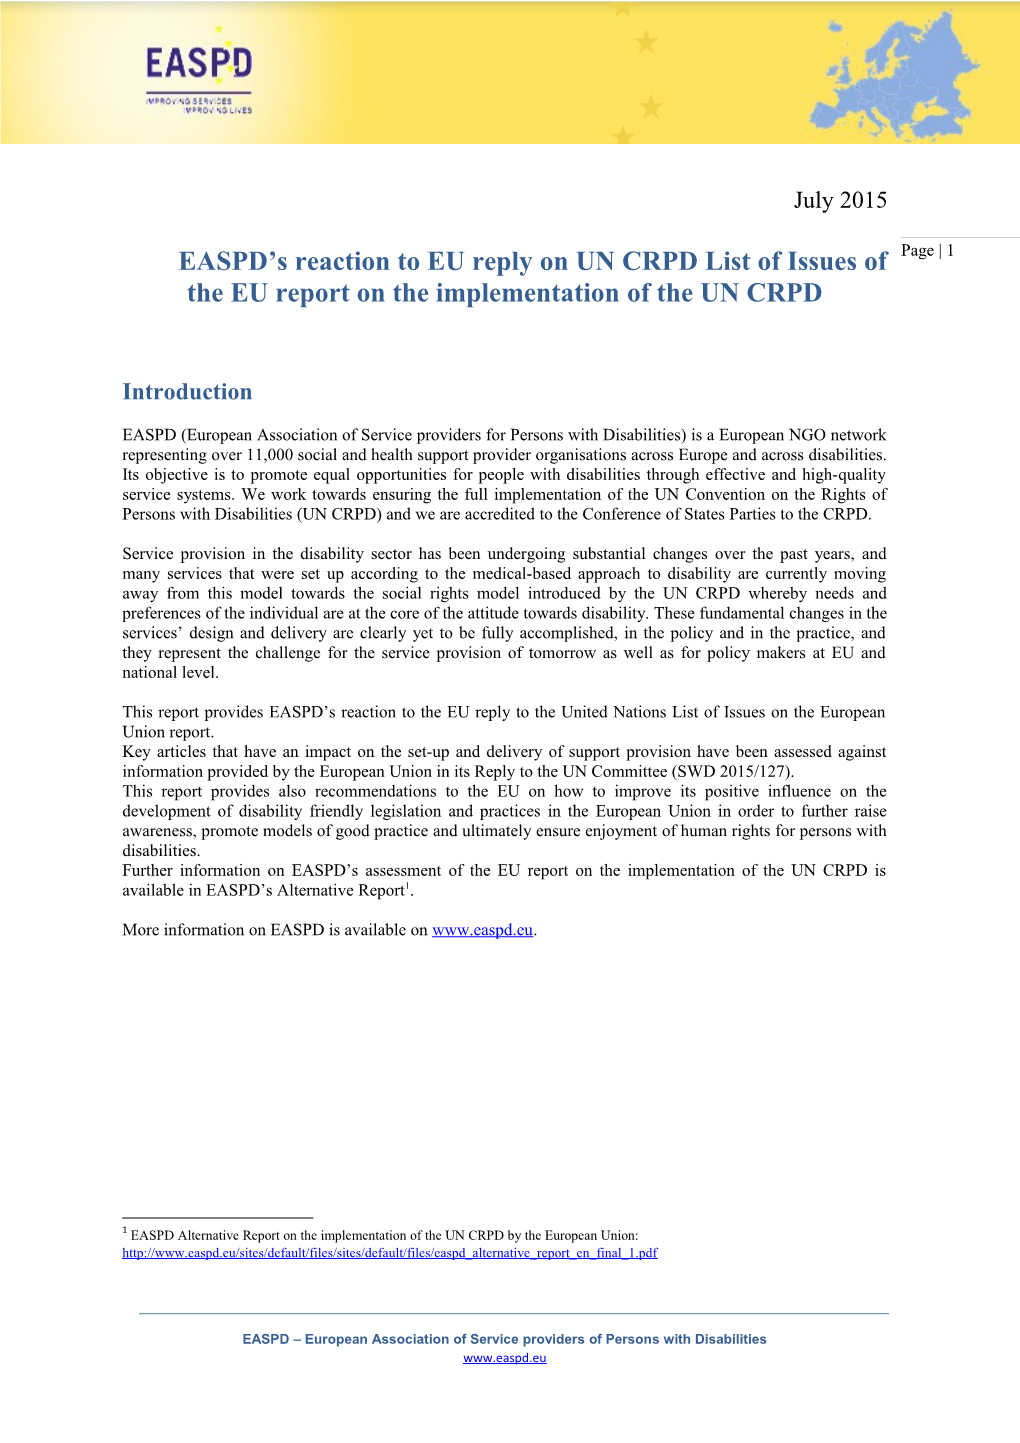 EASPD S Reaction to EU Reply on UN CRPD List of Issues of the EU Report on the Implementation